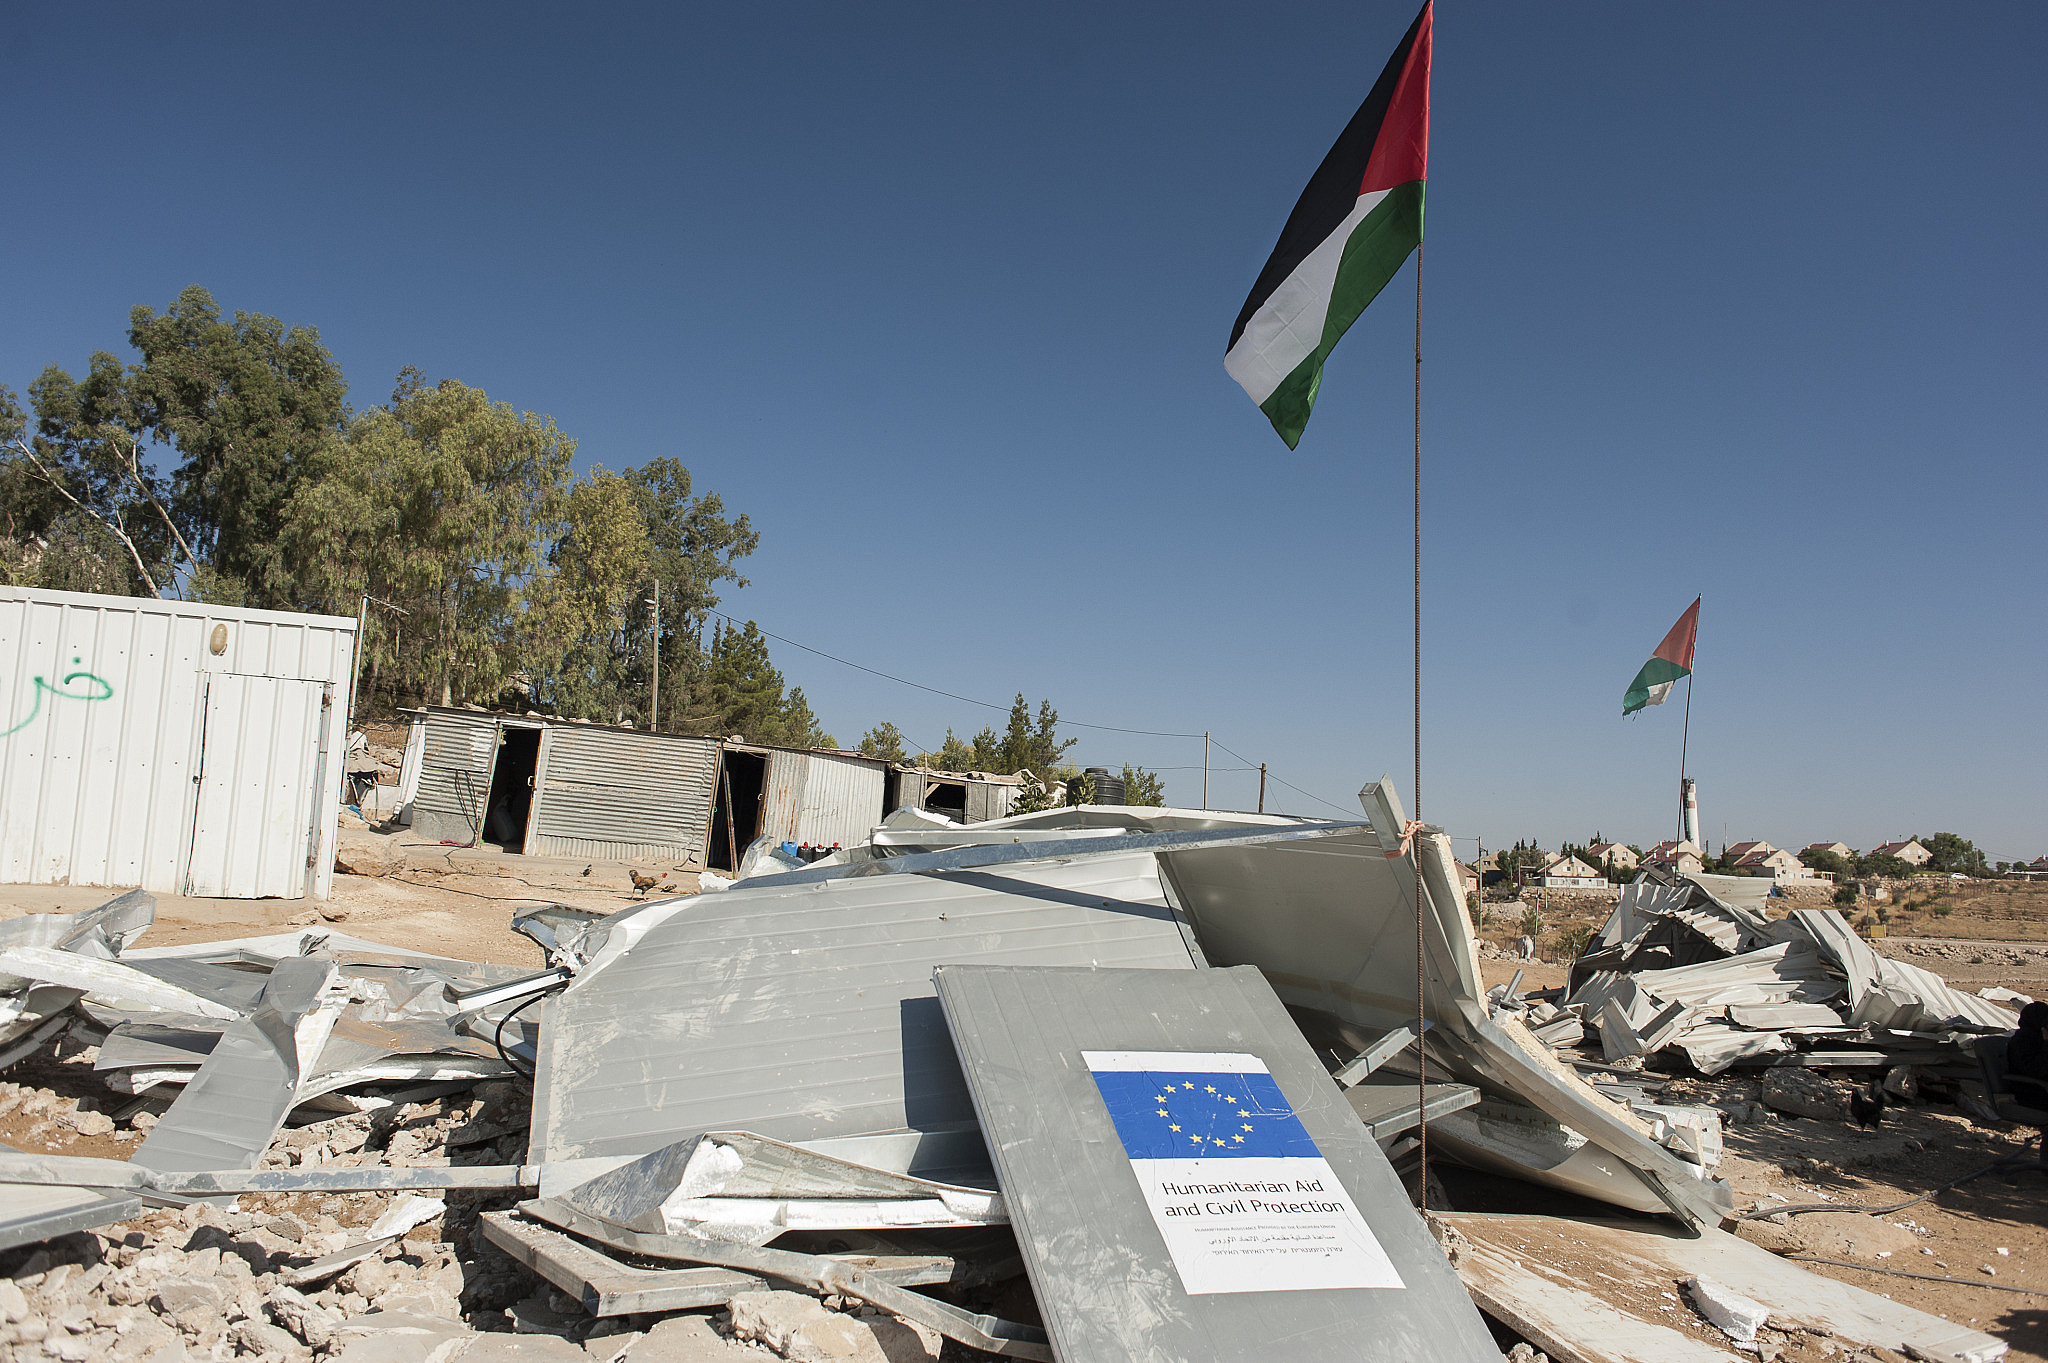 A sign bearing the name of the European Union is seen in the ruins of a house that was demolished by Israeli forces, Umm al Khair, South Hebron, West Bank, August 9, 2016. (Martin Barzilai/Activestills)